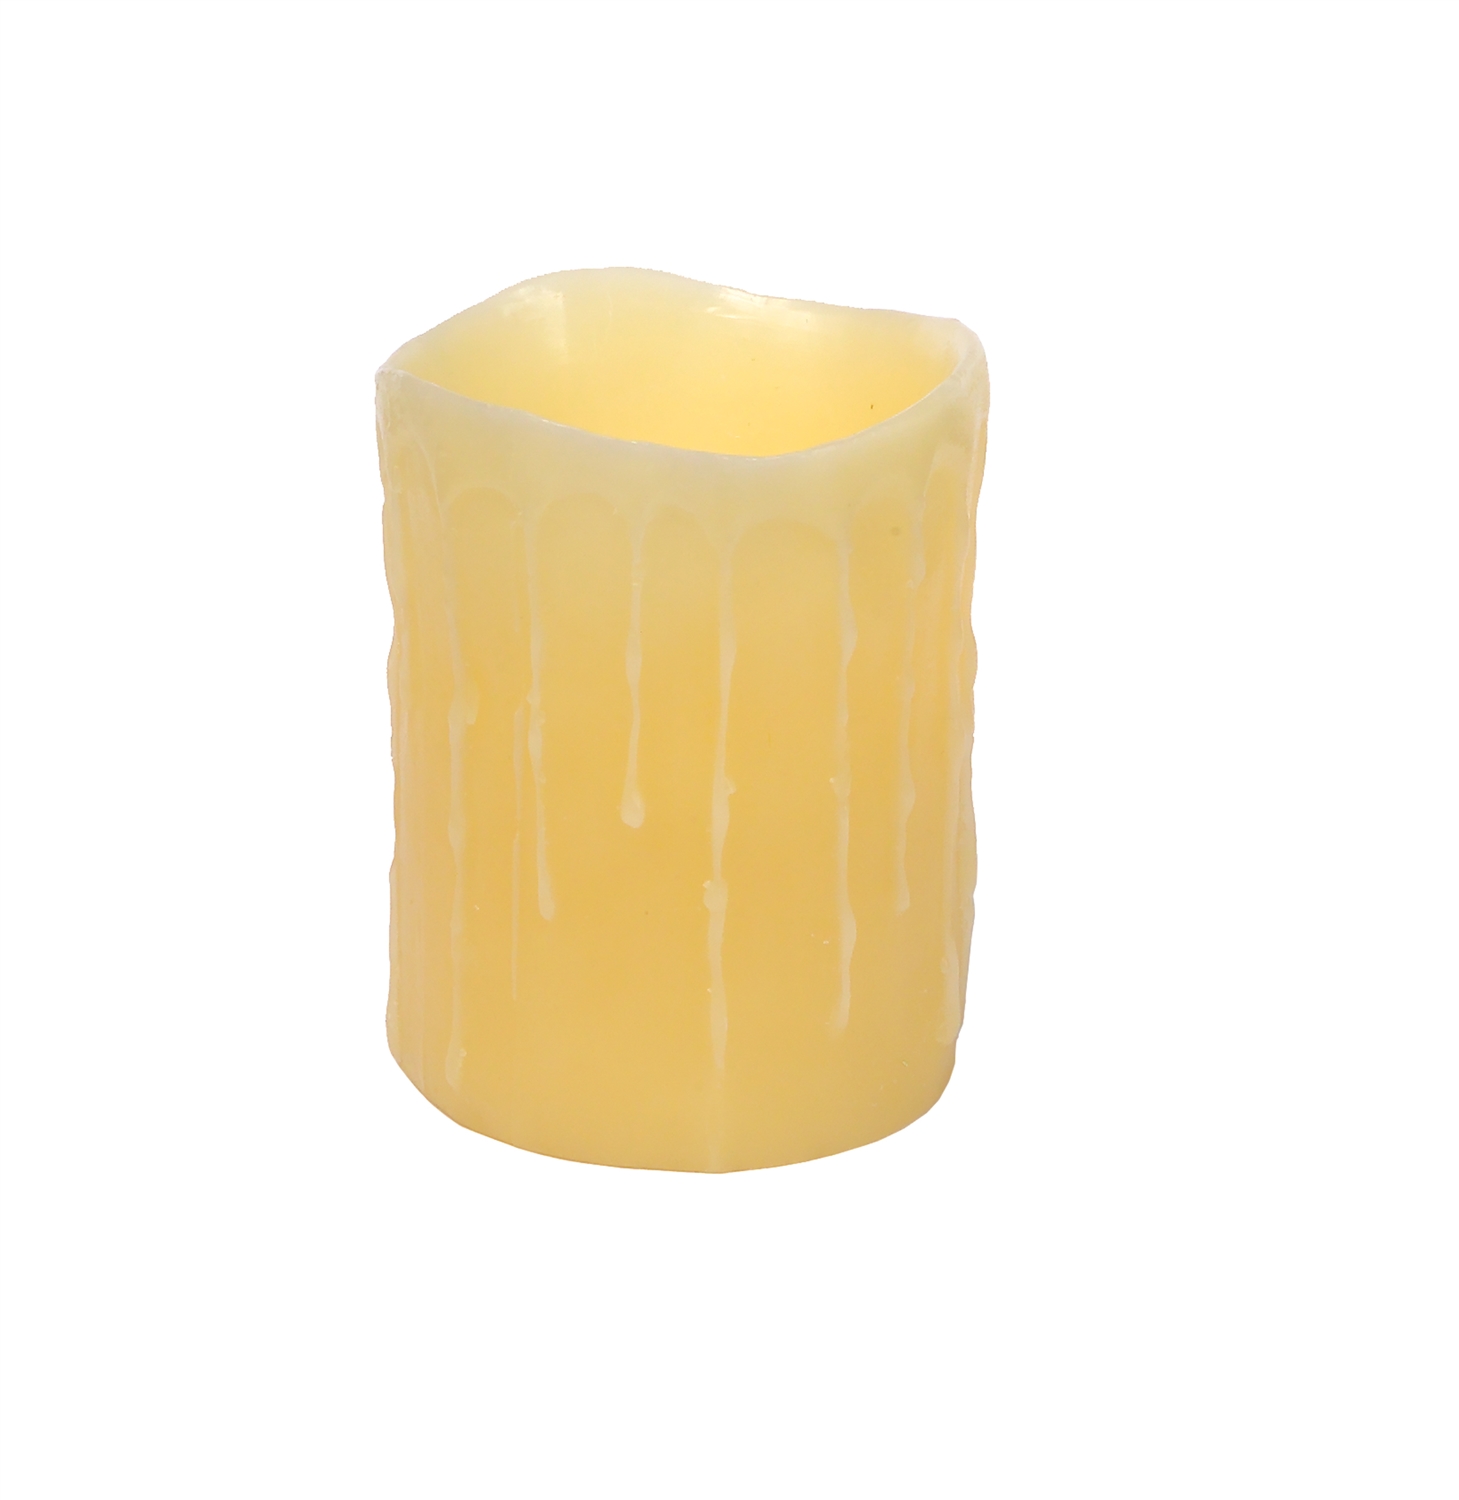 LED Wax Dripping Pillar Candle (Set of 3) 4"Dx5"H Wax/Plastic - 2 D Batteries Not Incld